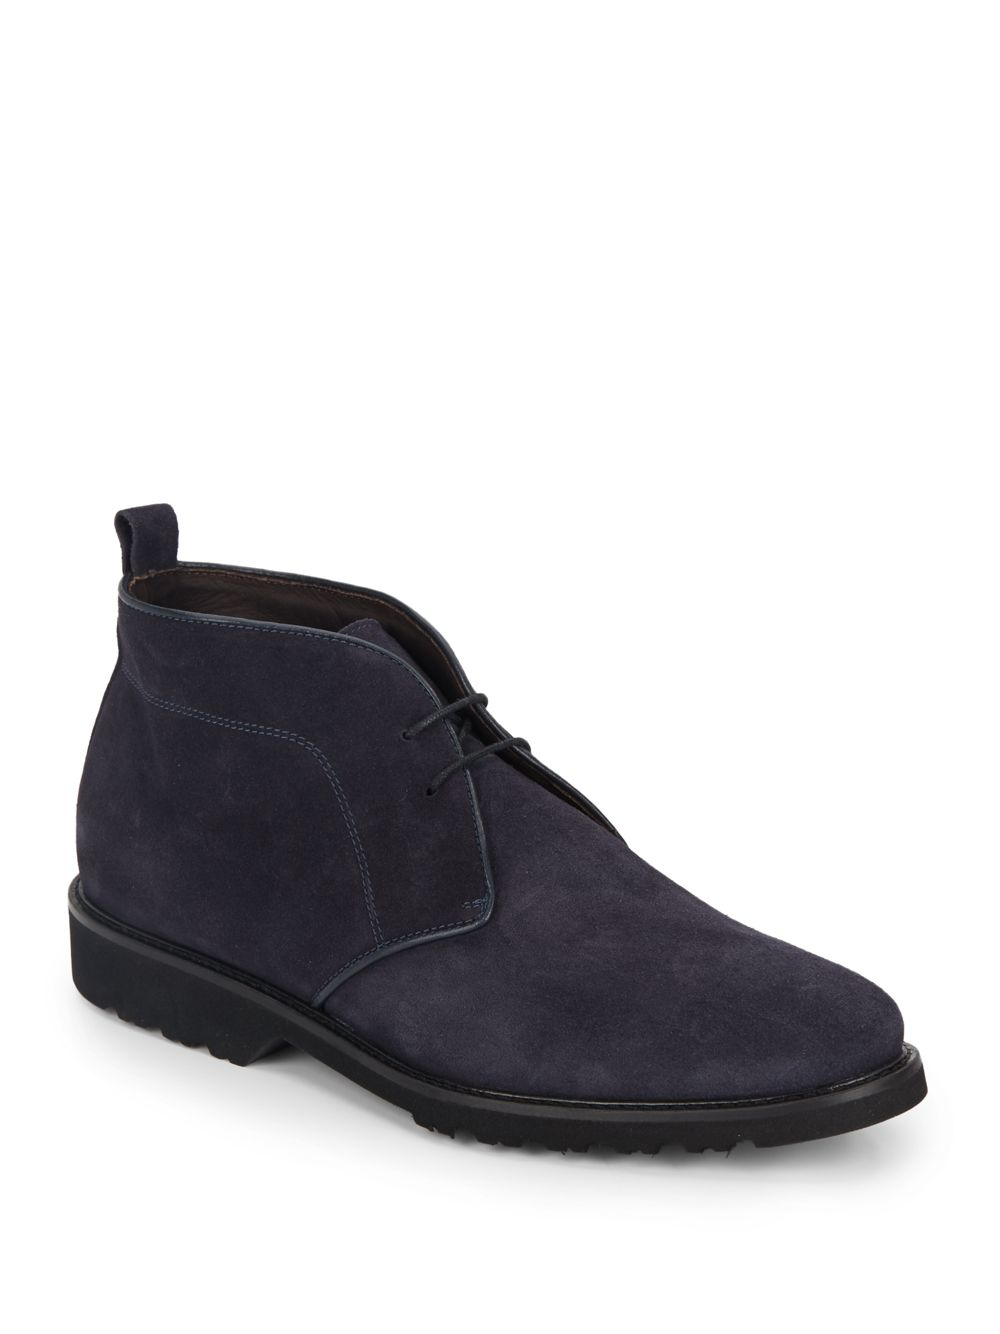 Bruno magli Wender Suede Chukka Boots in Blue for Men | Lyst